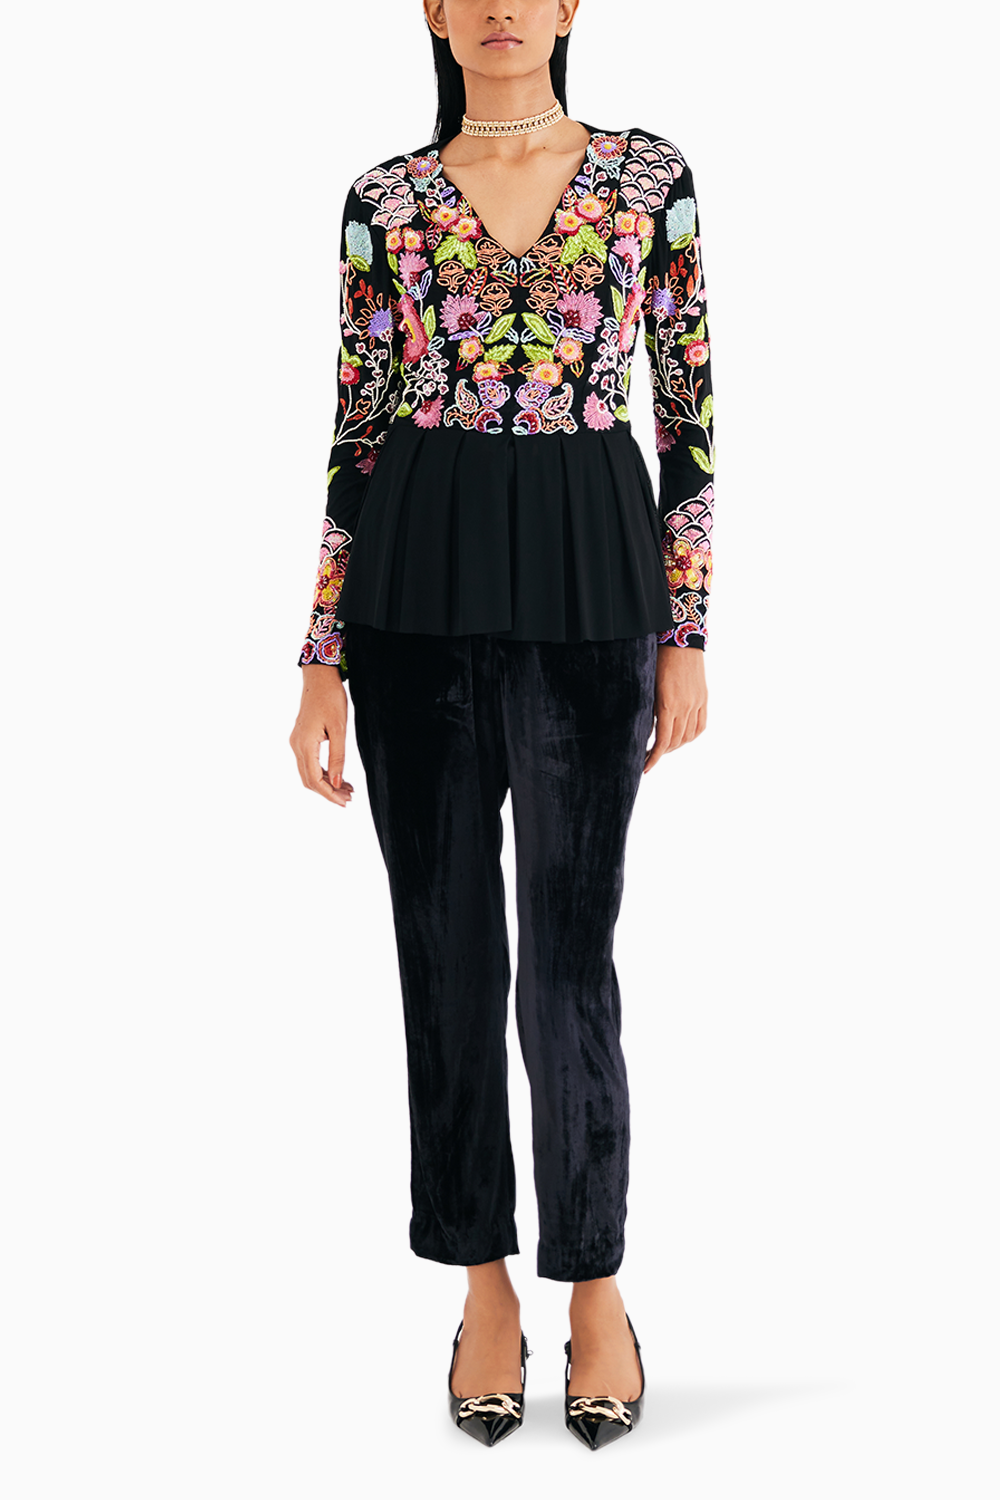 Black Embroidered Floral Net Top And Narrow Pants Set